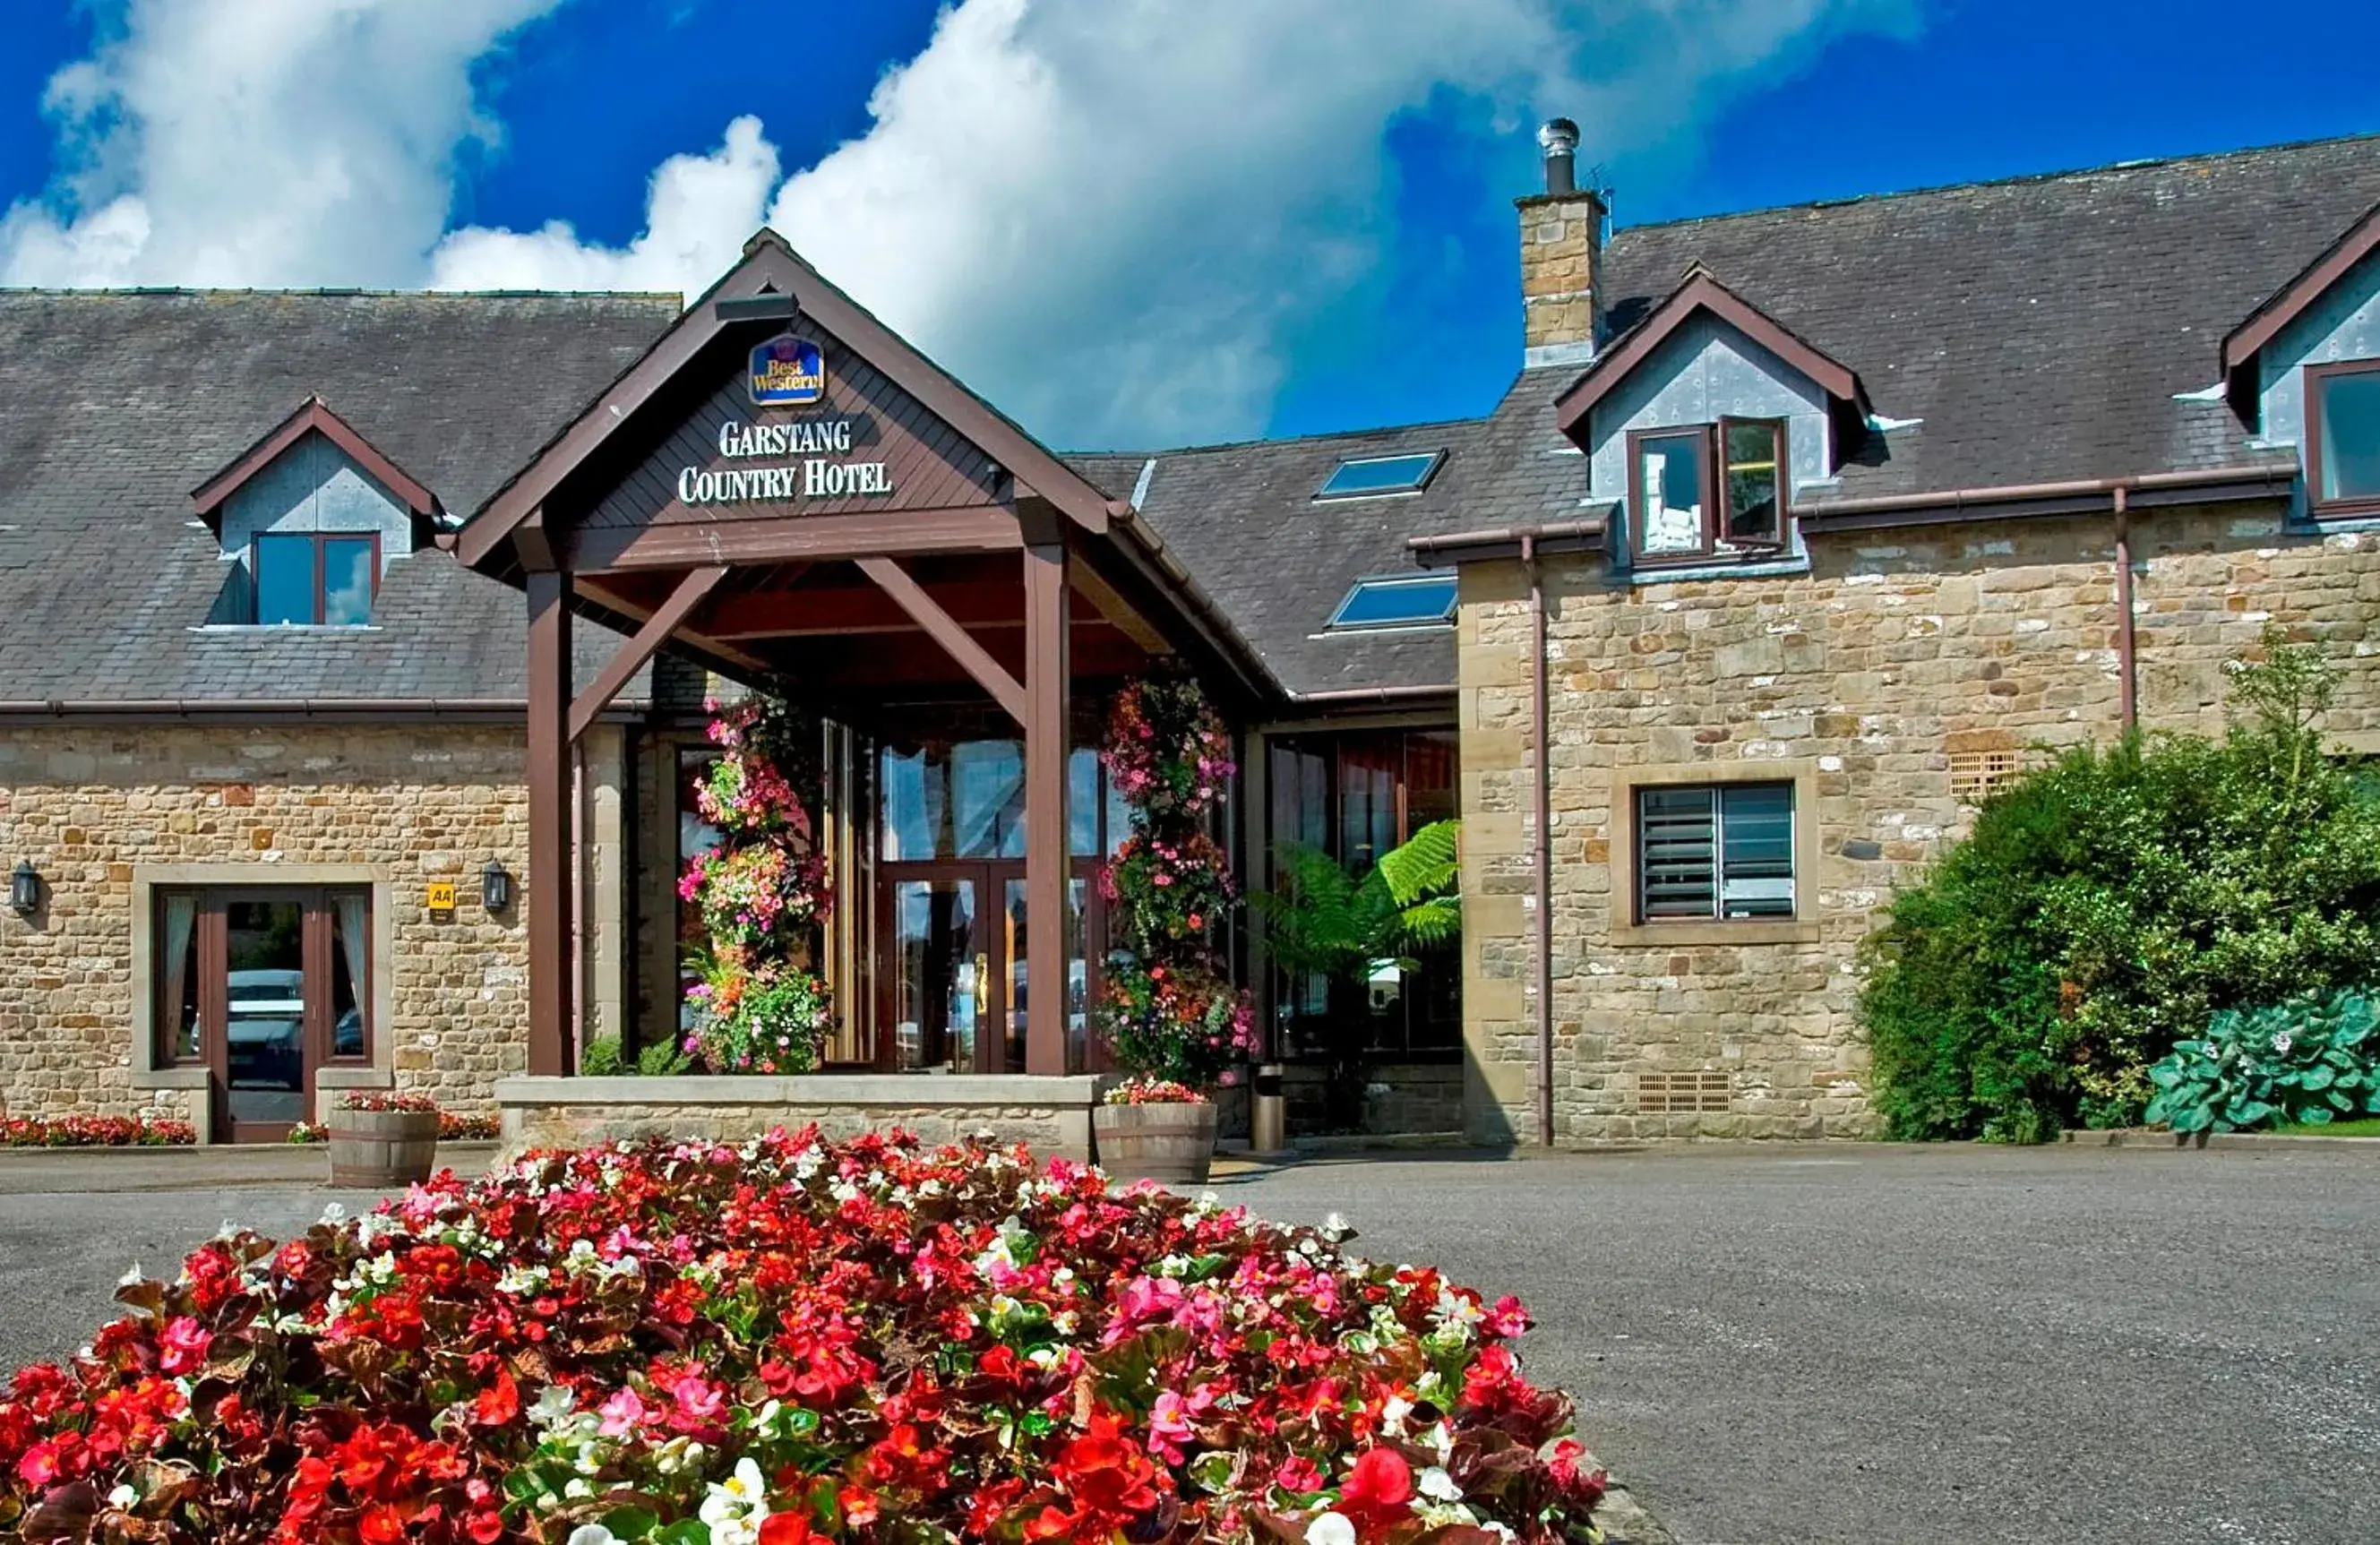 Property building in Best Western Preston Garstang Country Hotel and Golf Club